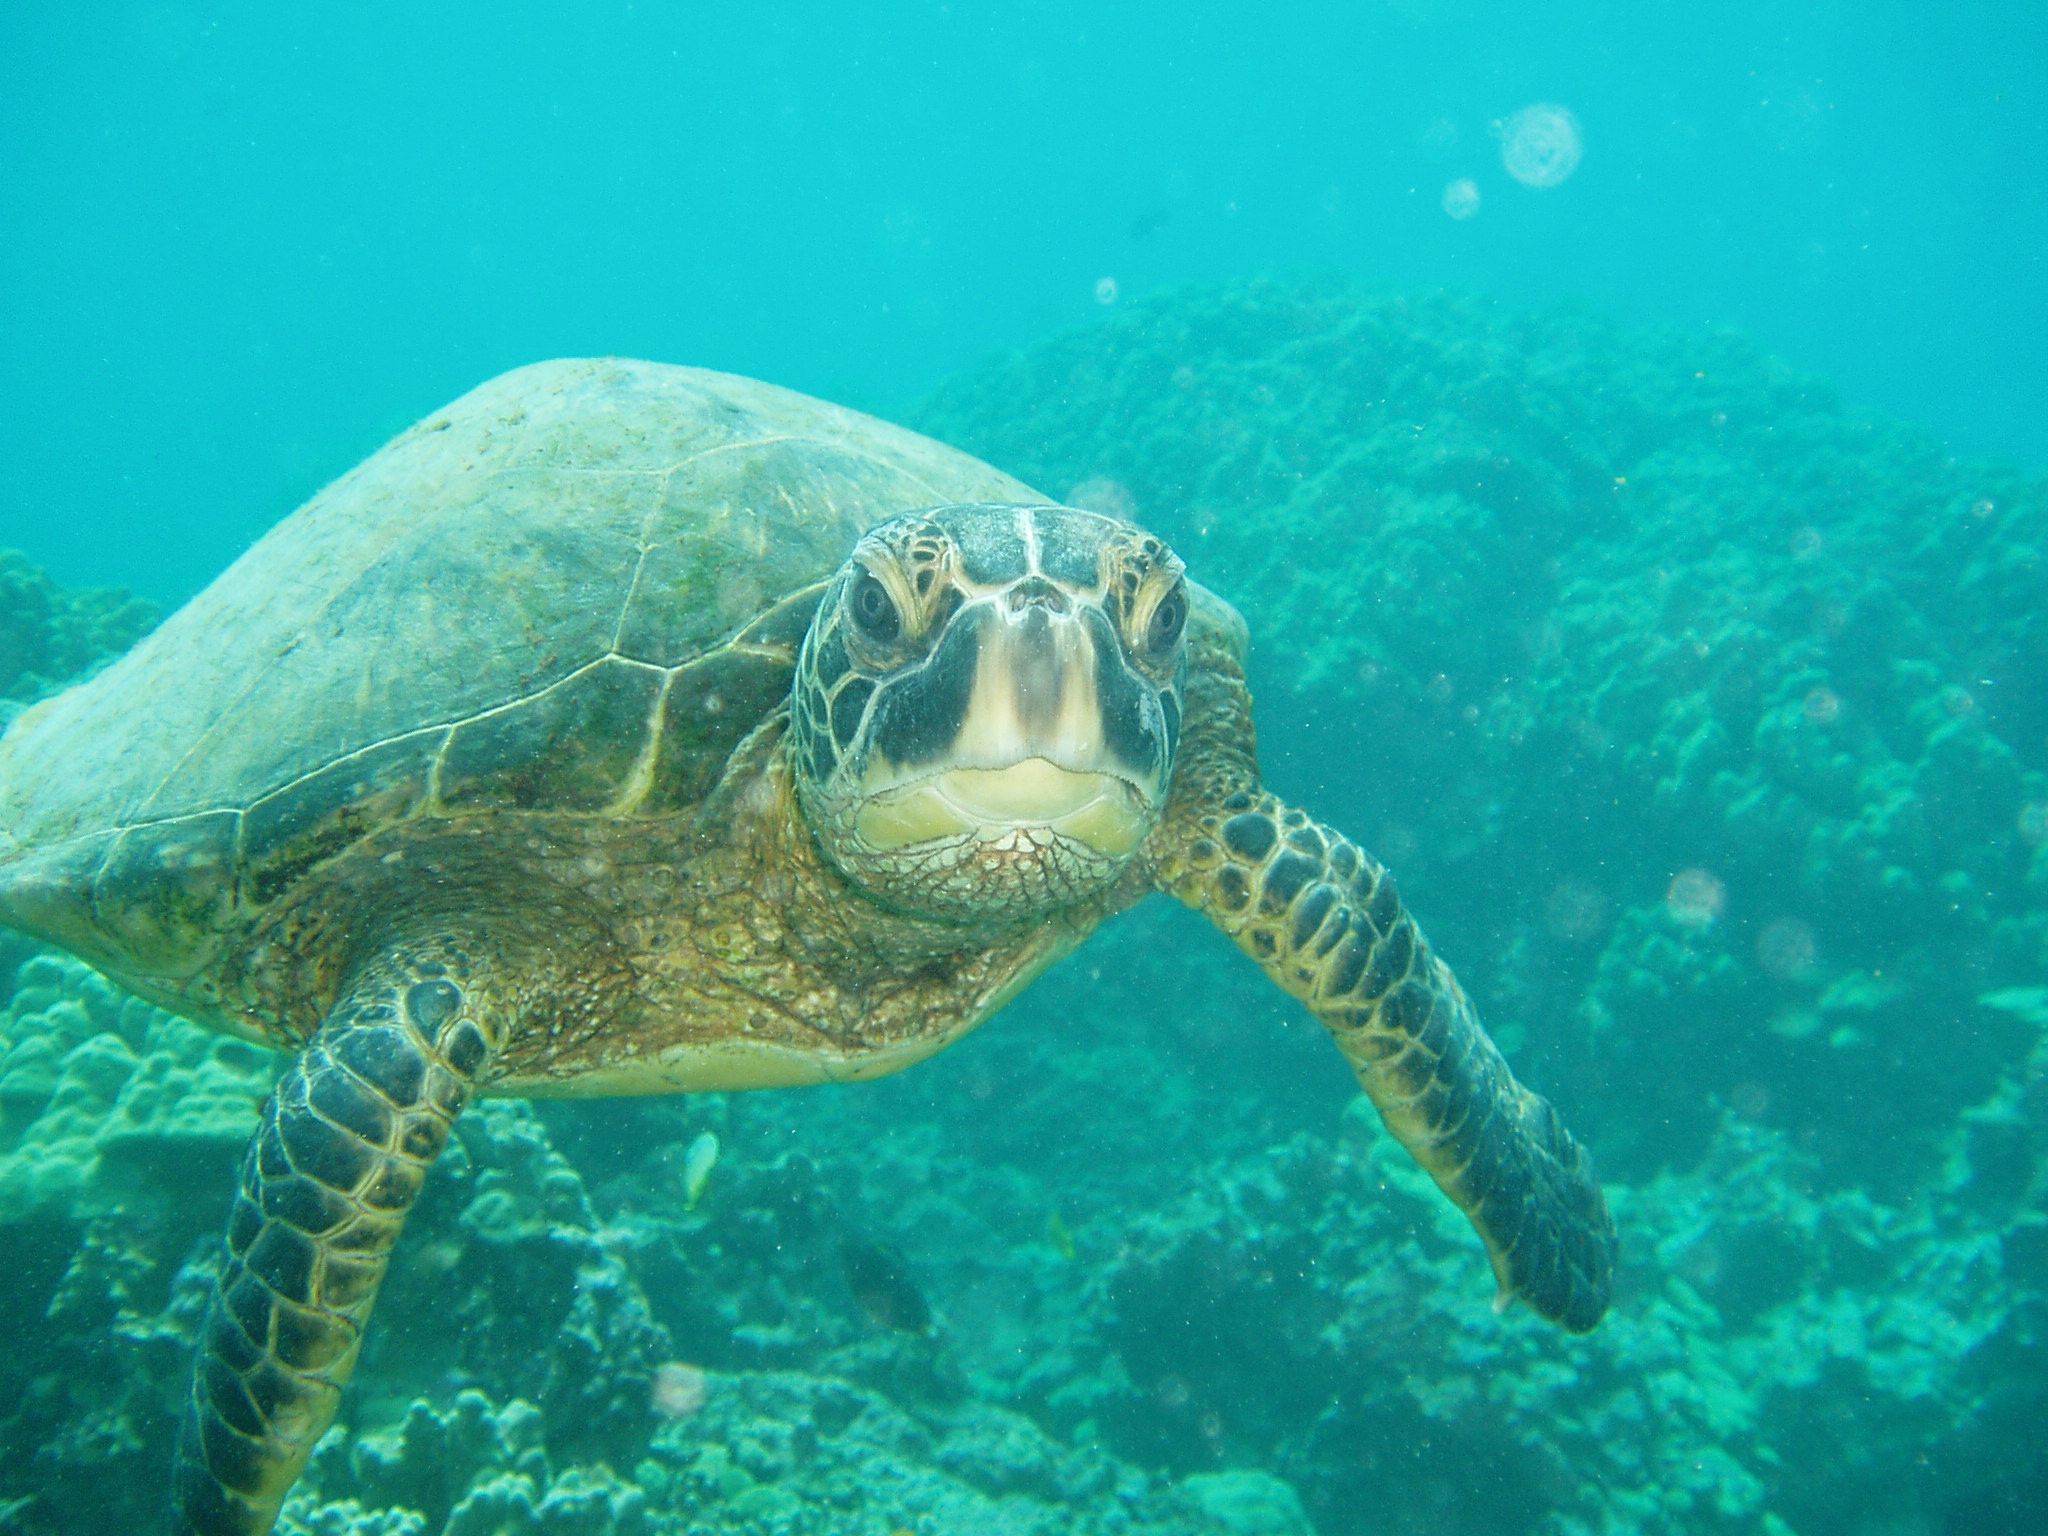 A green sea turtle swimming in the ocean